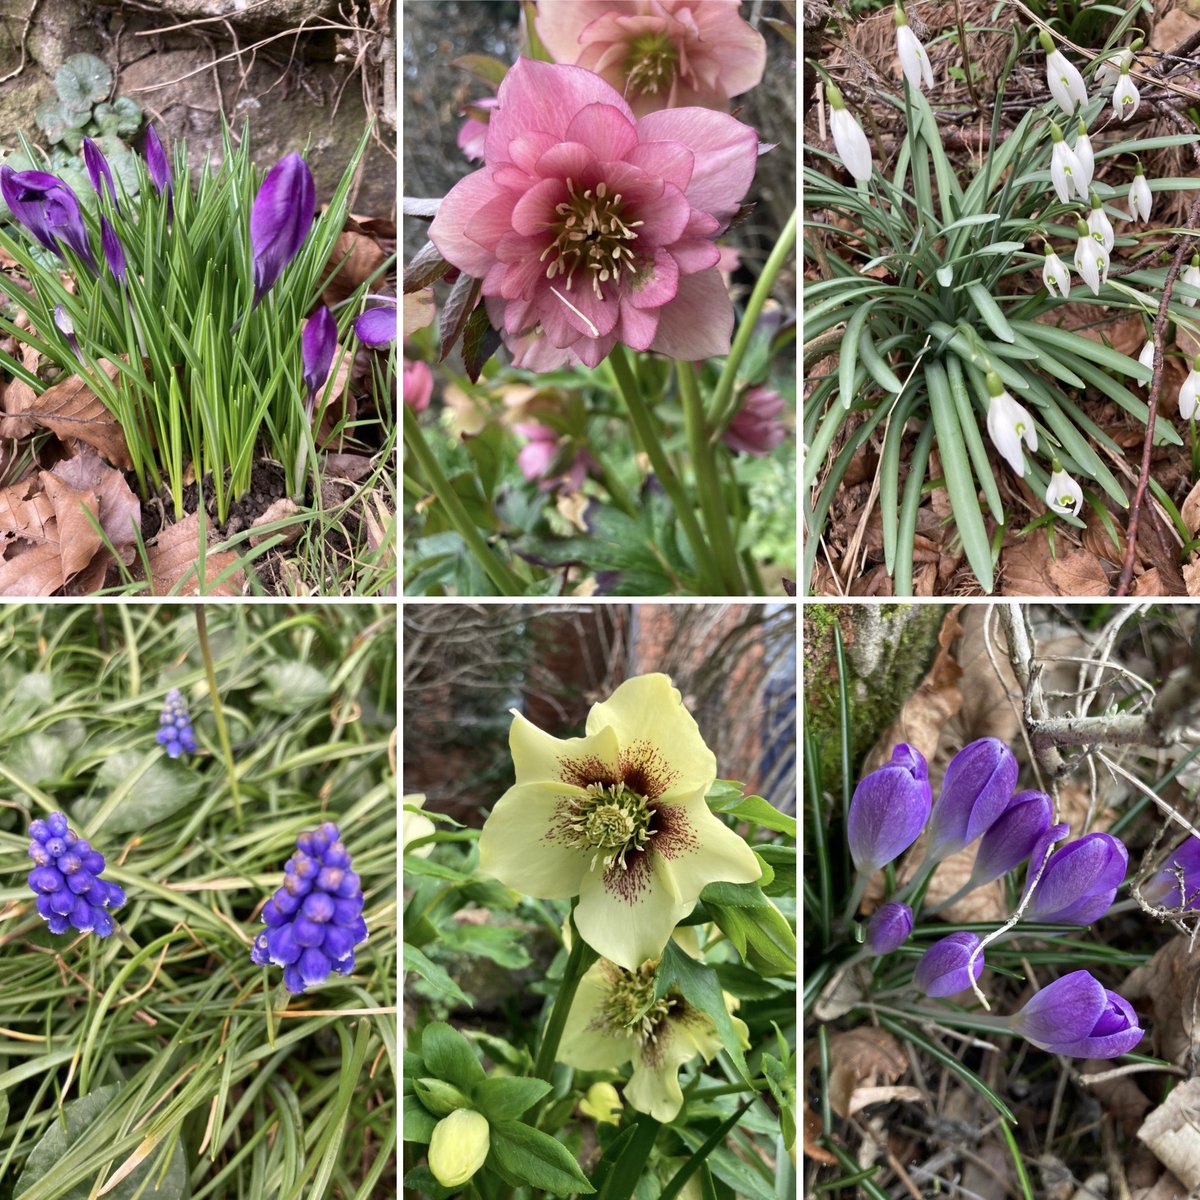 #SixOnSaturday from this morning’s run. Have a fun weekend! #Flowers #flowerphotography #springflowers #NatureBeauty #running #SaturdayMotivations